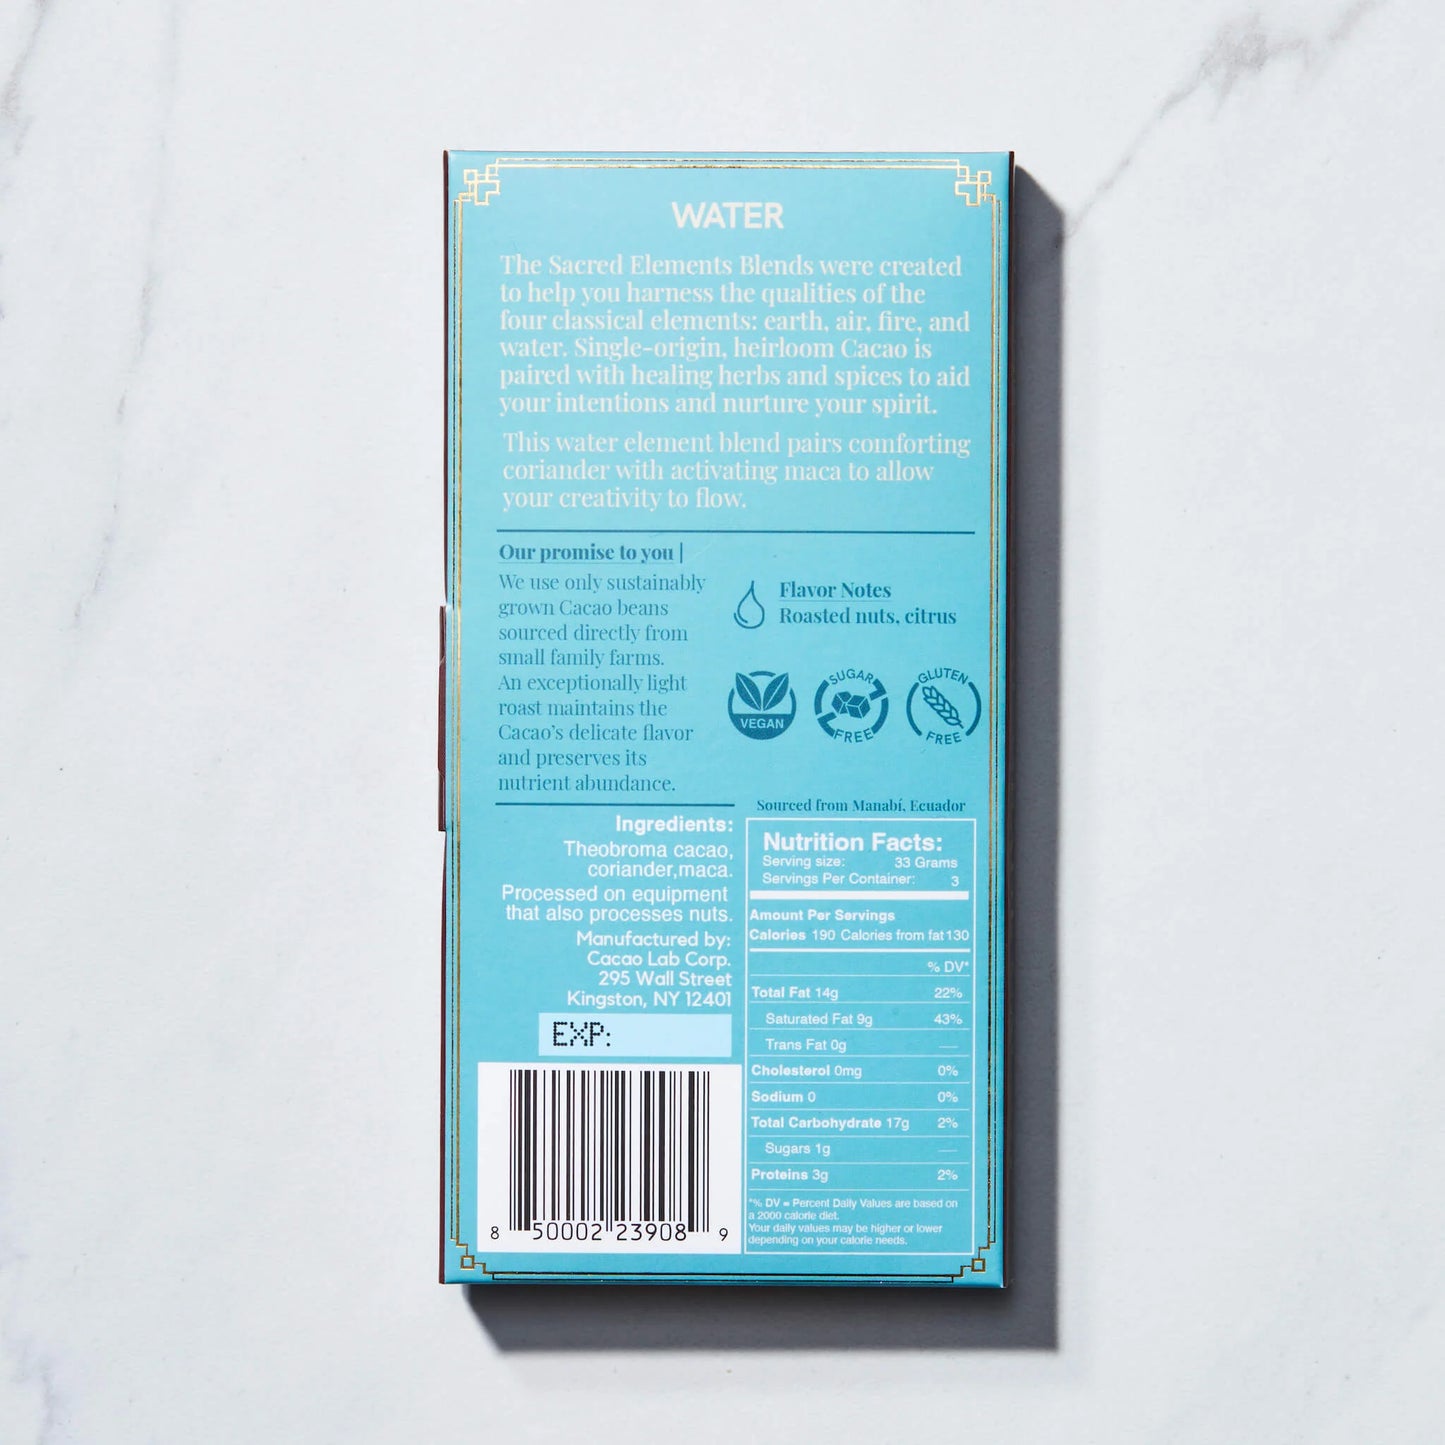 CEREMONIAL CACAO - WATER Element: Invoke Your Creativity with Coriander and Maca (3.5 oz bar)